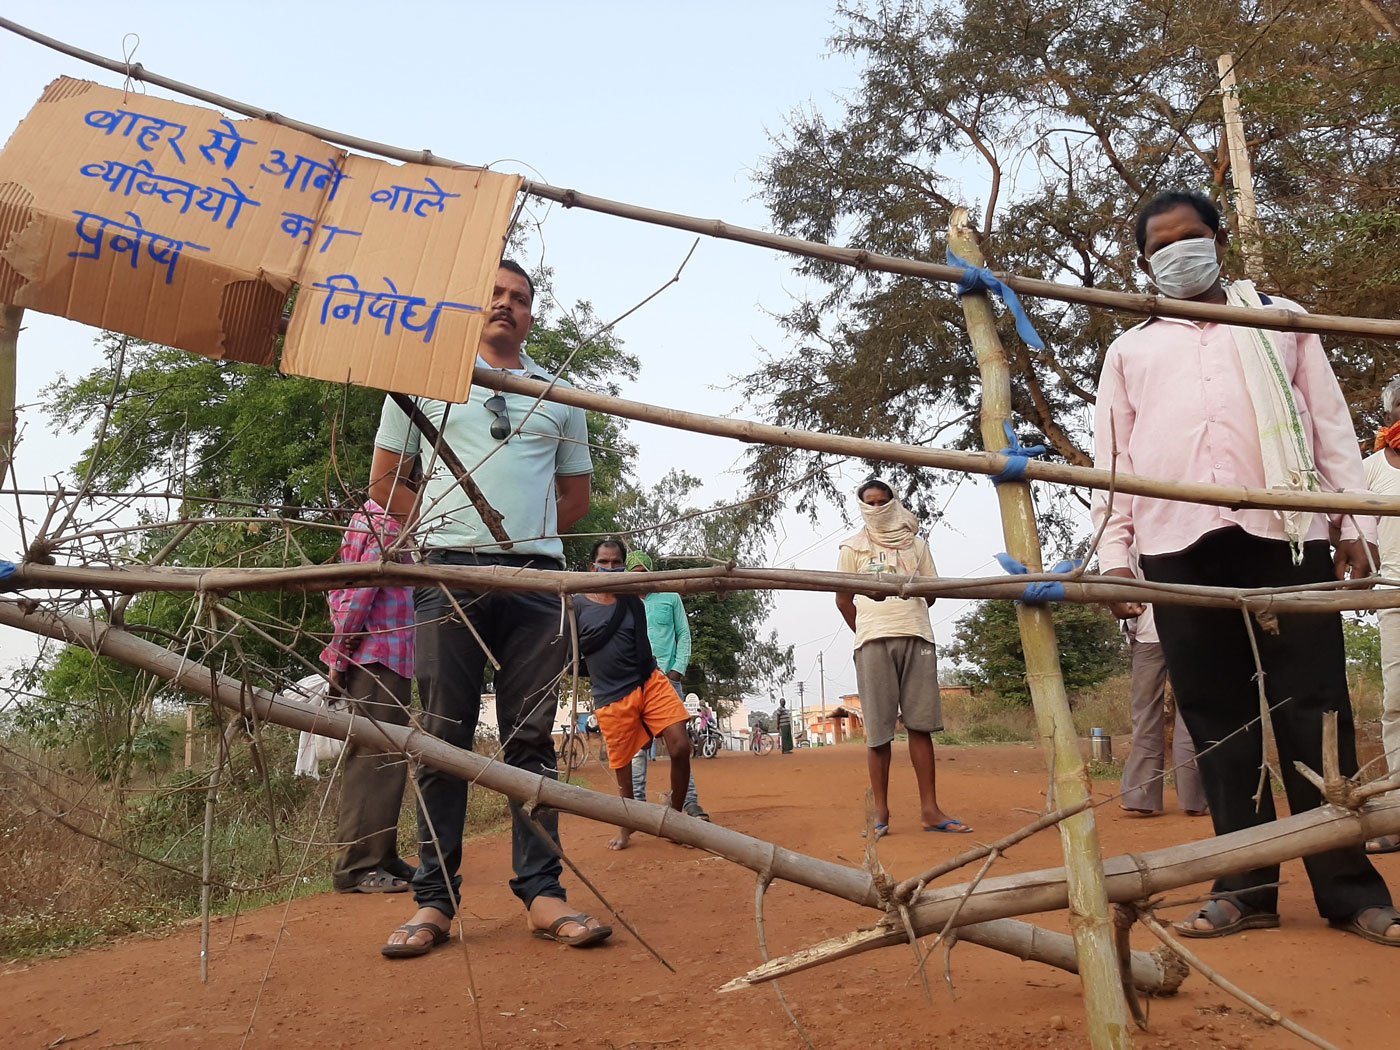 Across parts of the Bastar region, people are setting up barricades denying entry to ‘outsiders’ – and restricting the access of even migrants returning to their own villages